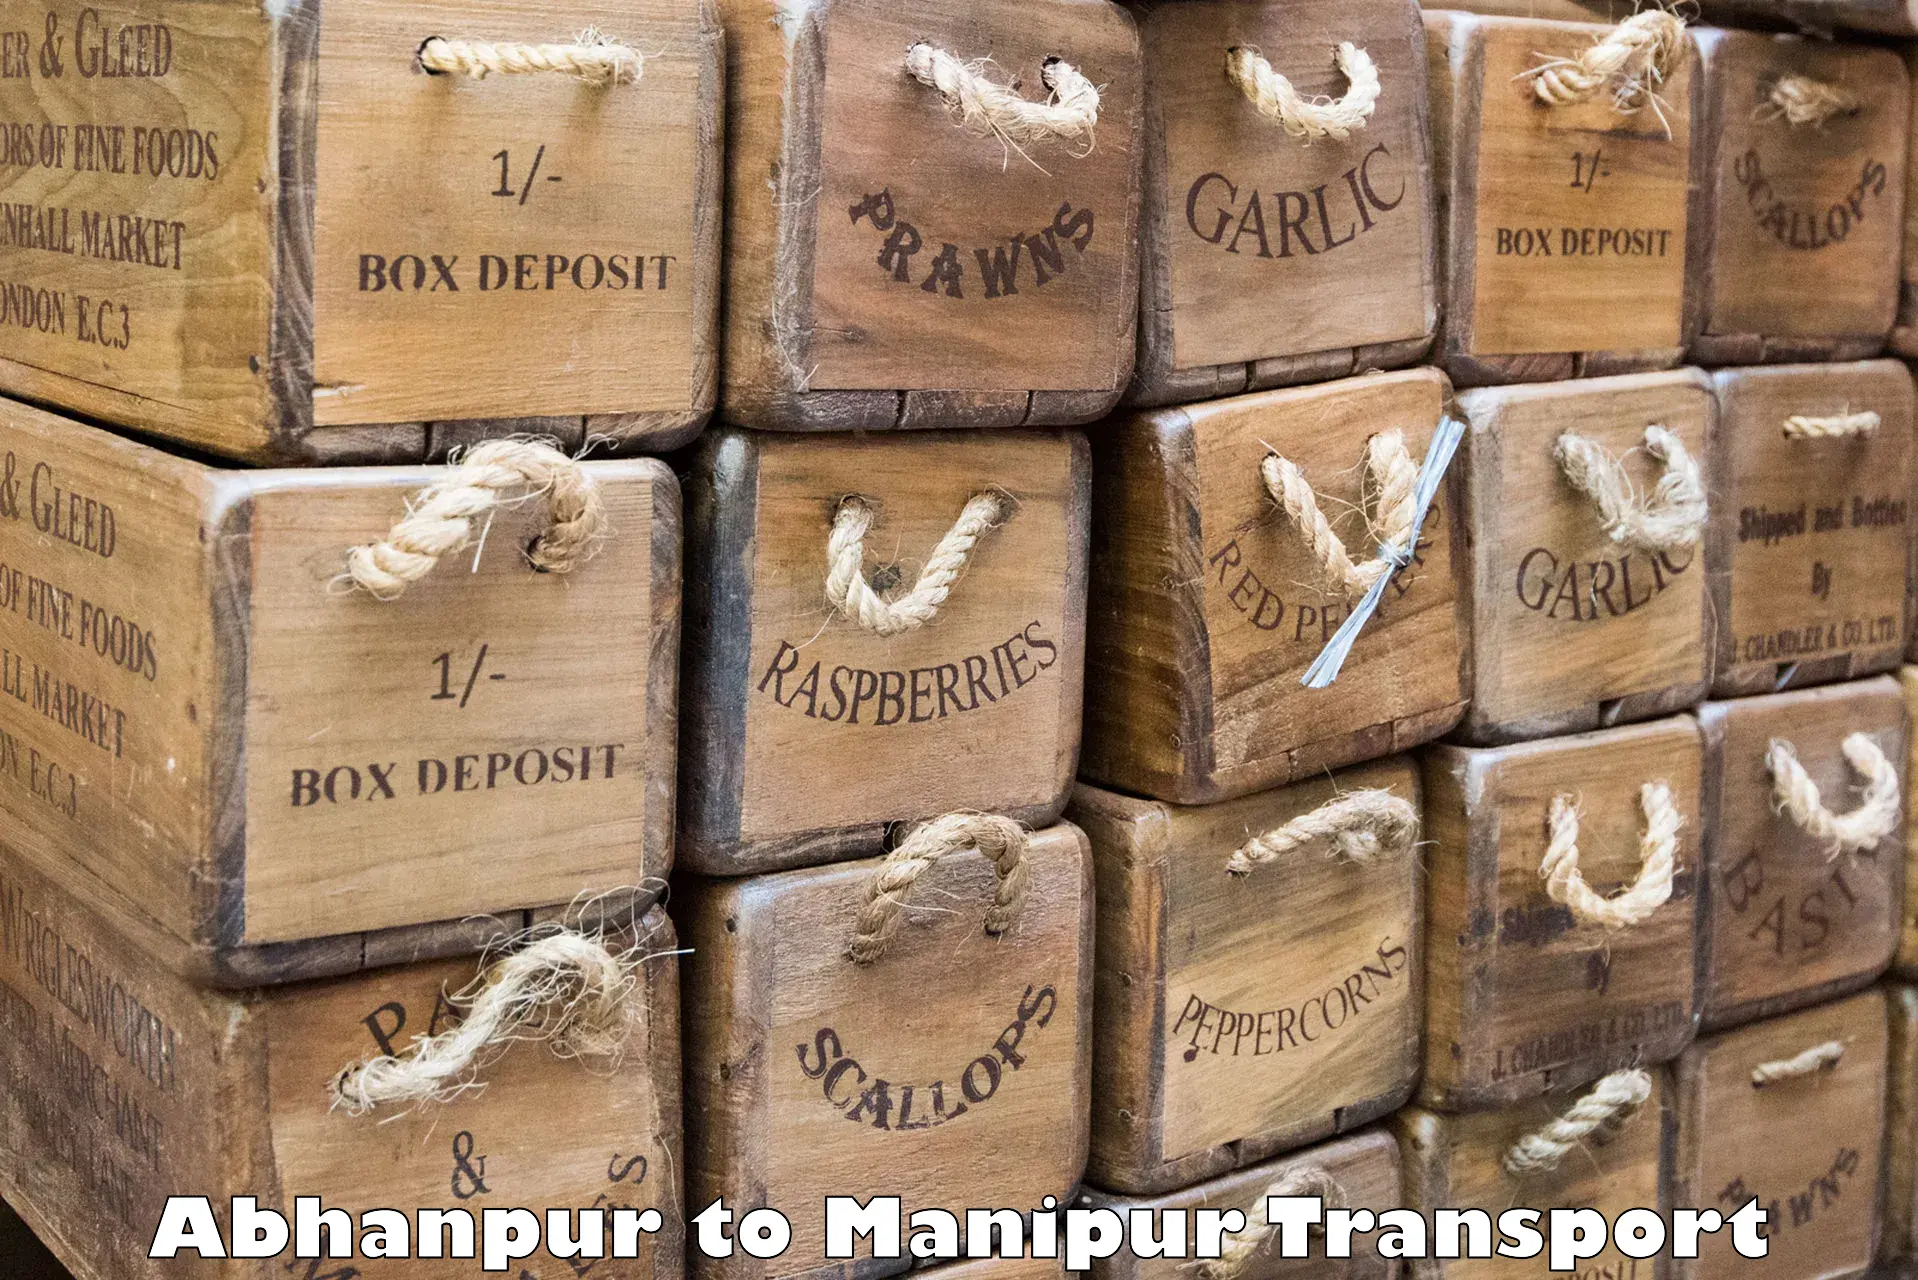 Interstate transport services Abhanpur to Imphal